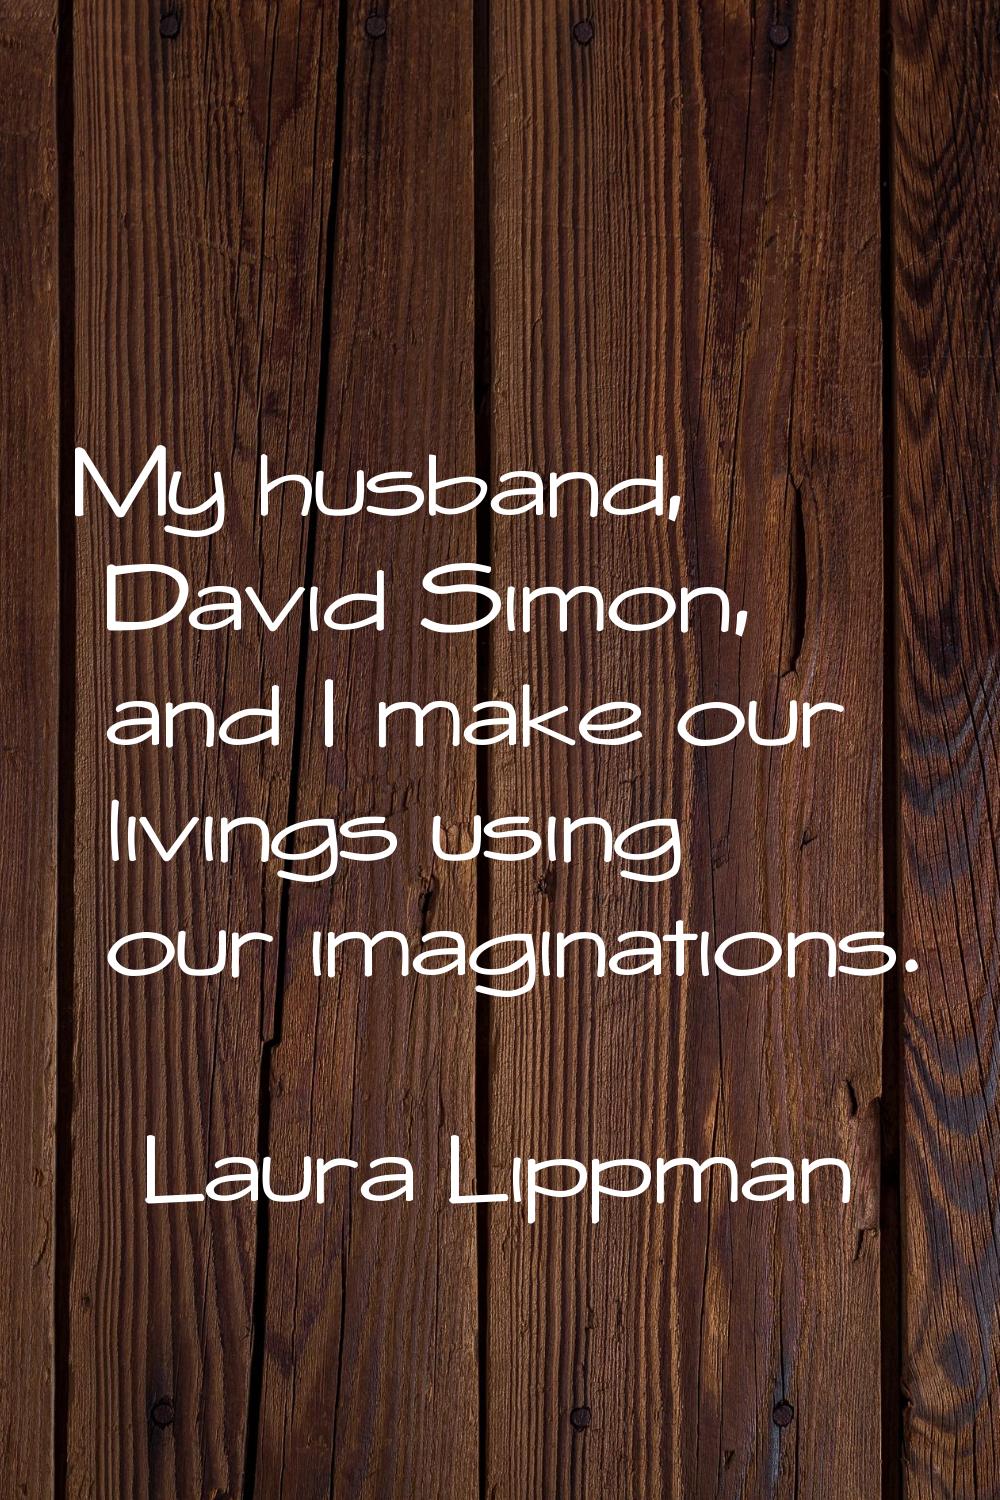 My husband, David Simon, and I make our livings using our imaginations.